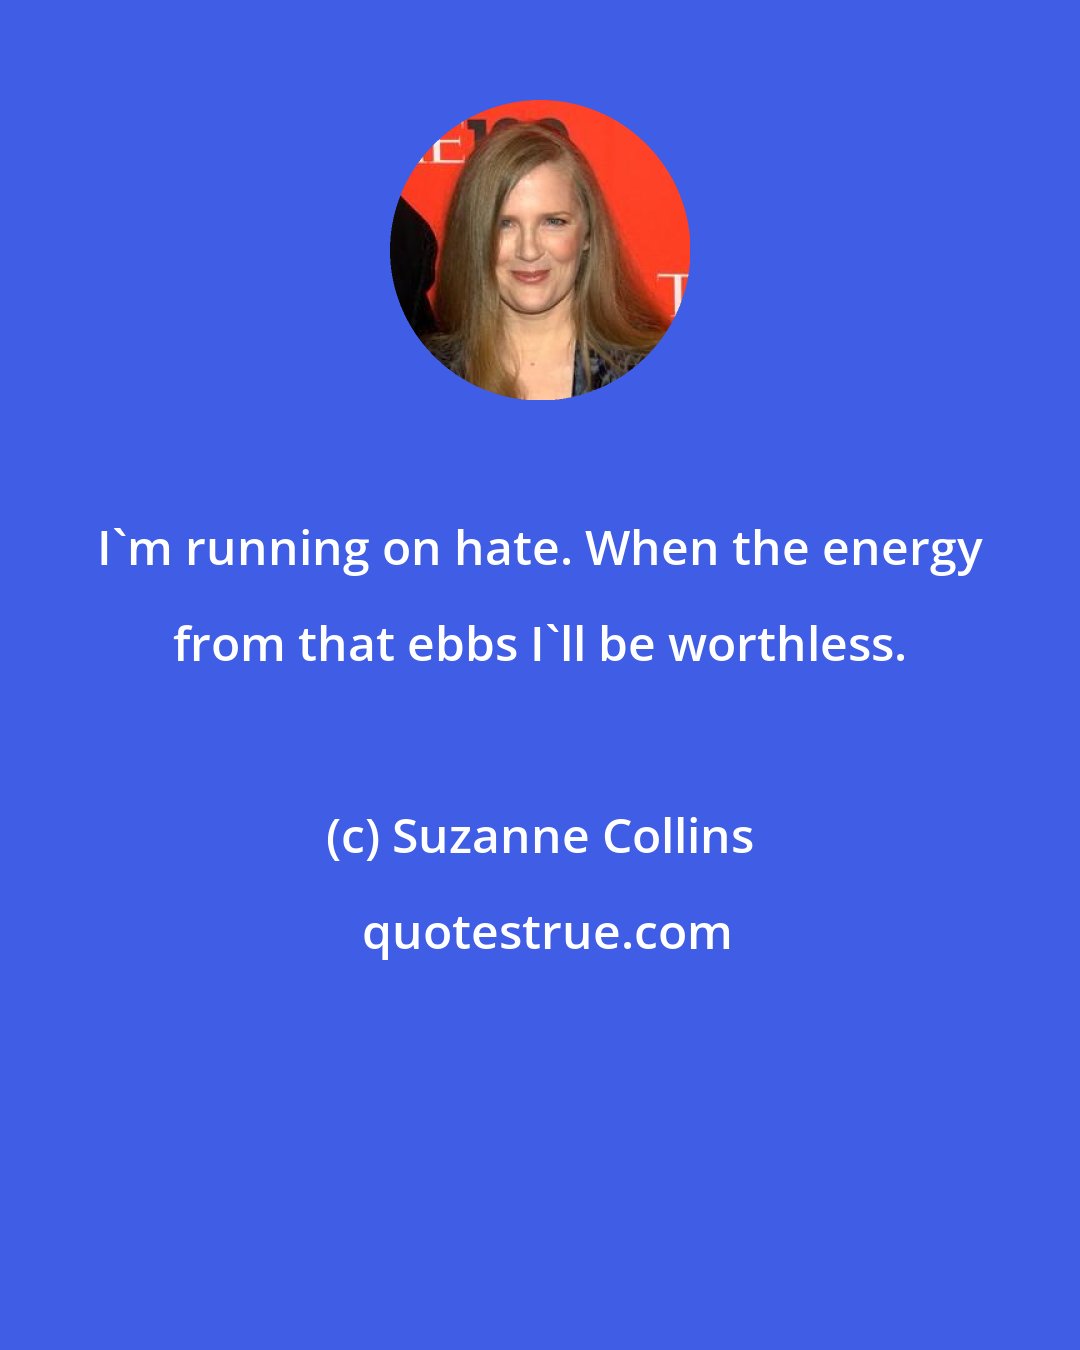 Suzanne Collins: I'm running on hate. When the energy from that ebbs I'll be worthless.